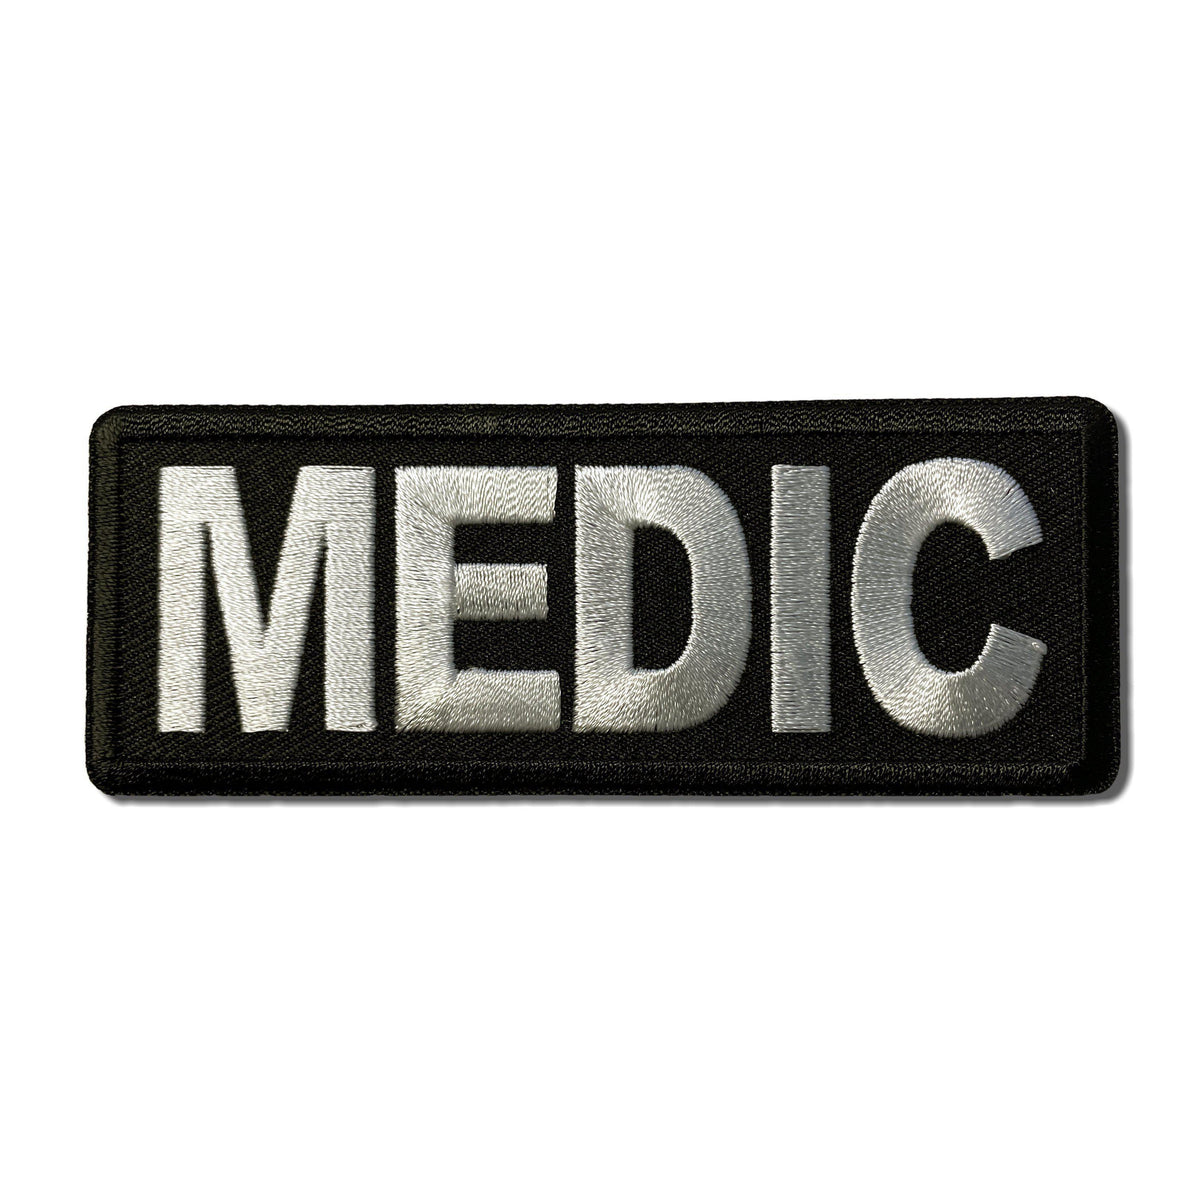 Embroidered Medic Iron on Sew on Patch